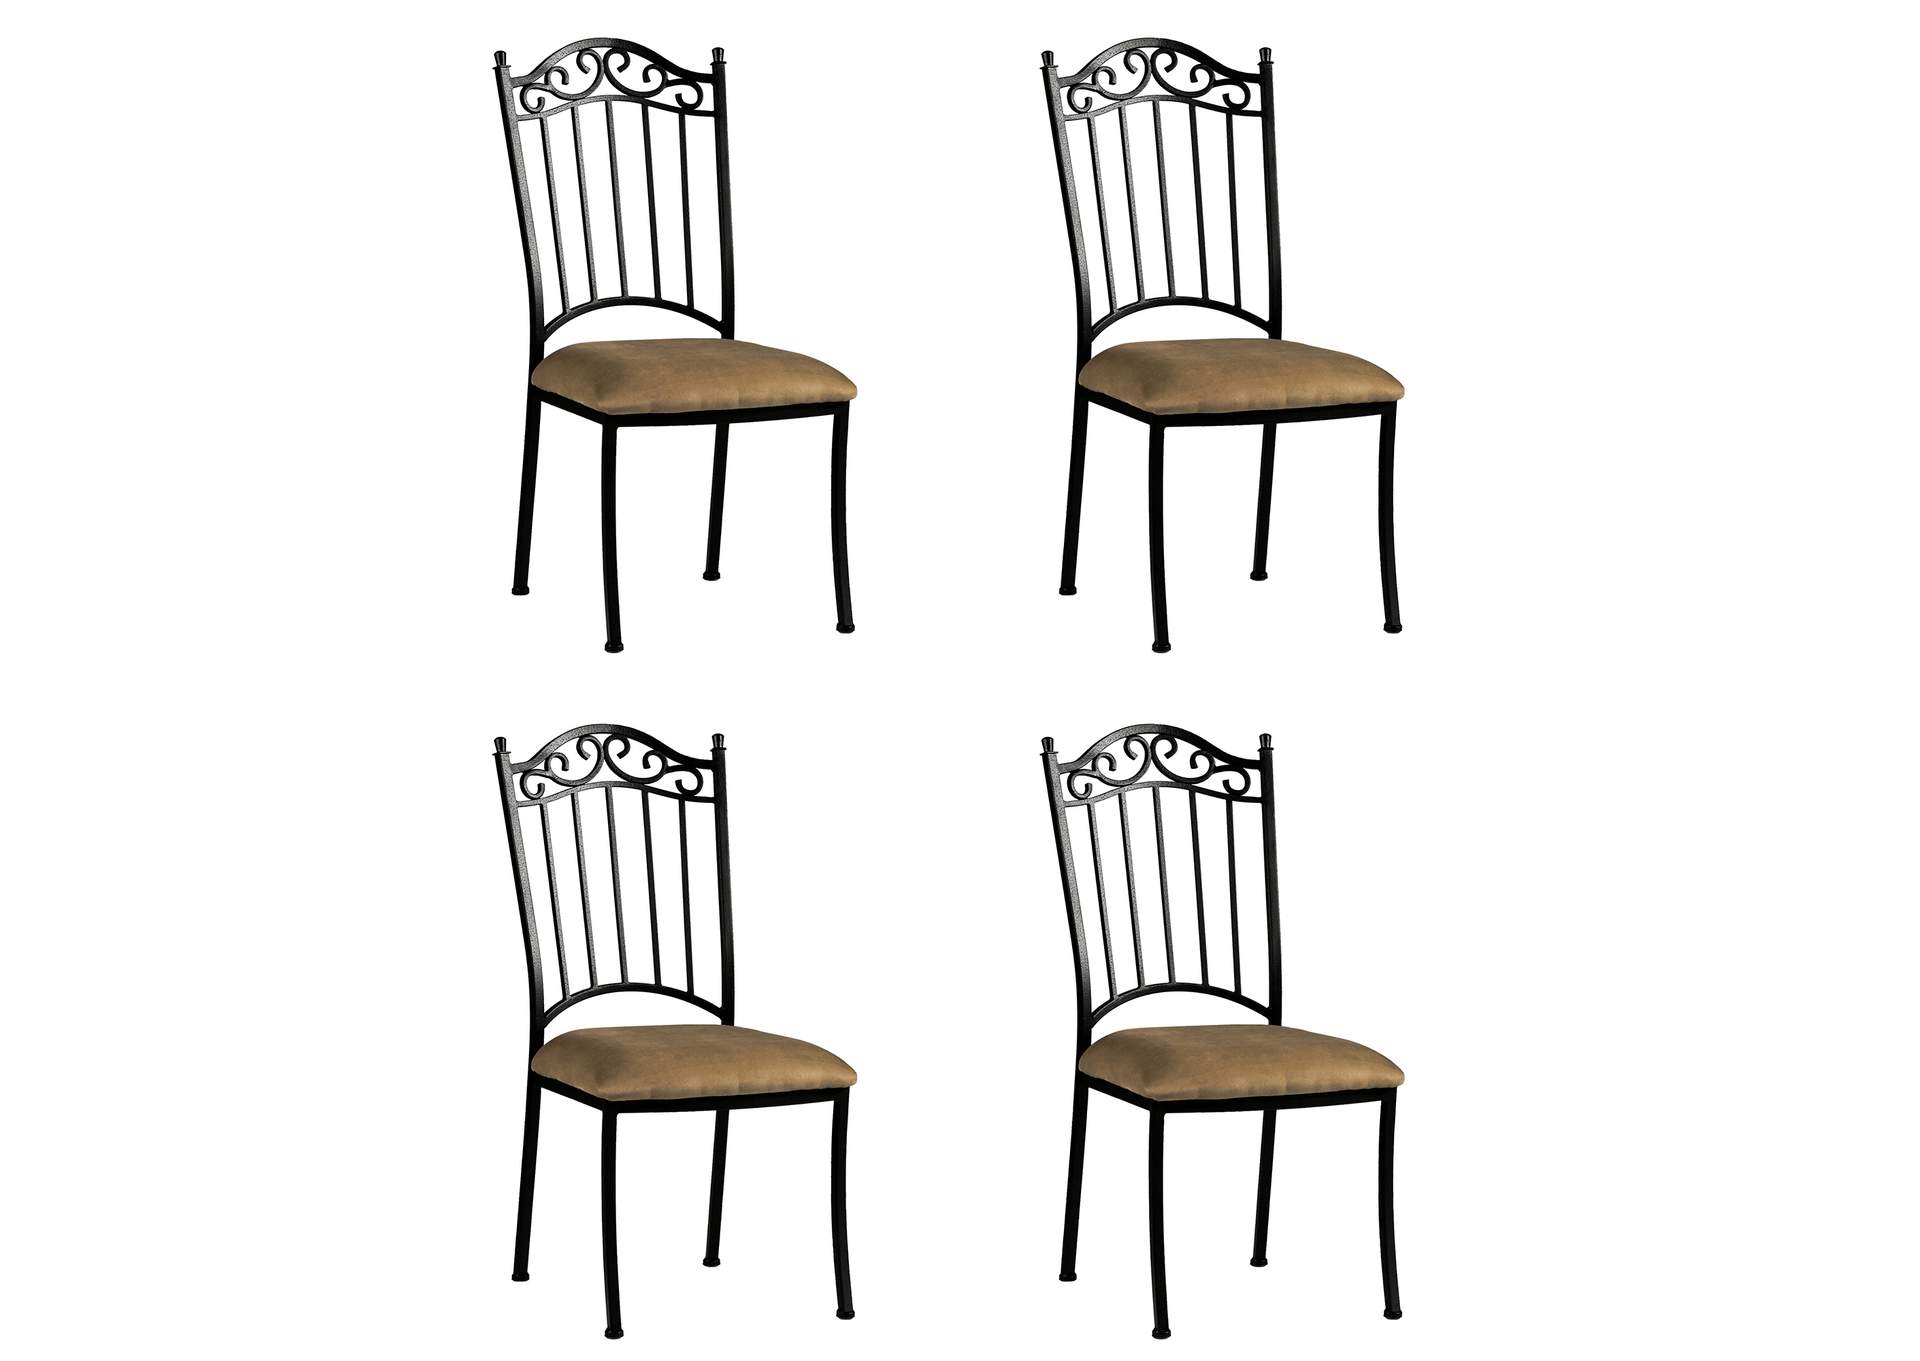 Transitional Style Wrought Iron Side Chair,Chintaly Imports